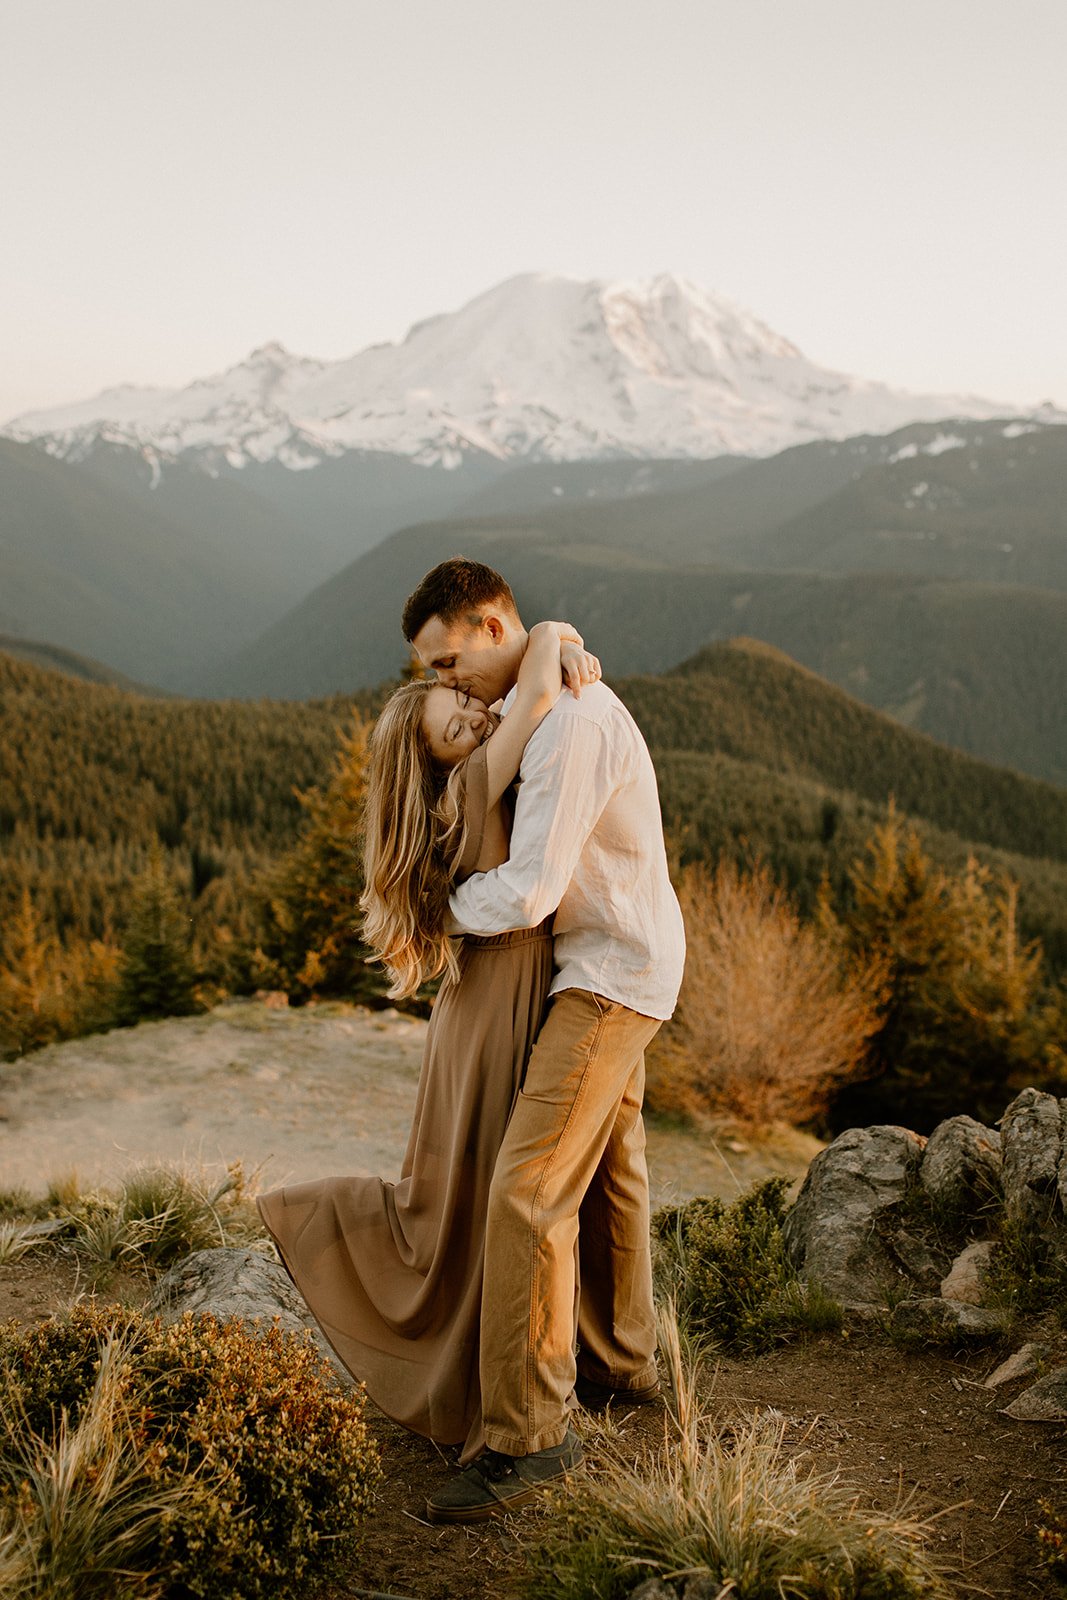 Women hugging her partner with her arms wrapped up around his neck while he is kissing her on the cheek while standing in front of mt. Rainier's peak